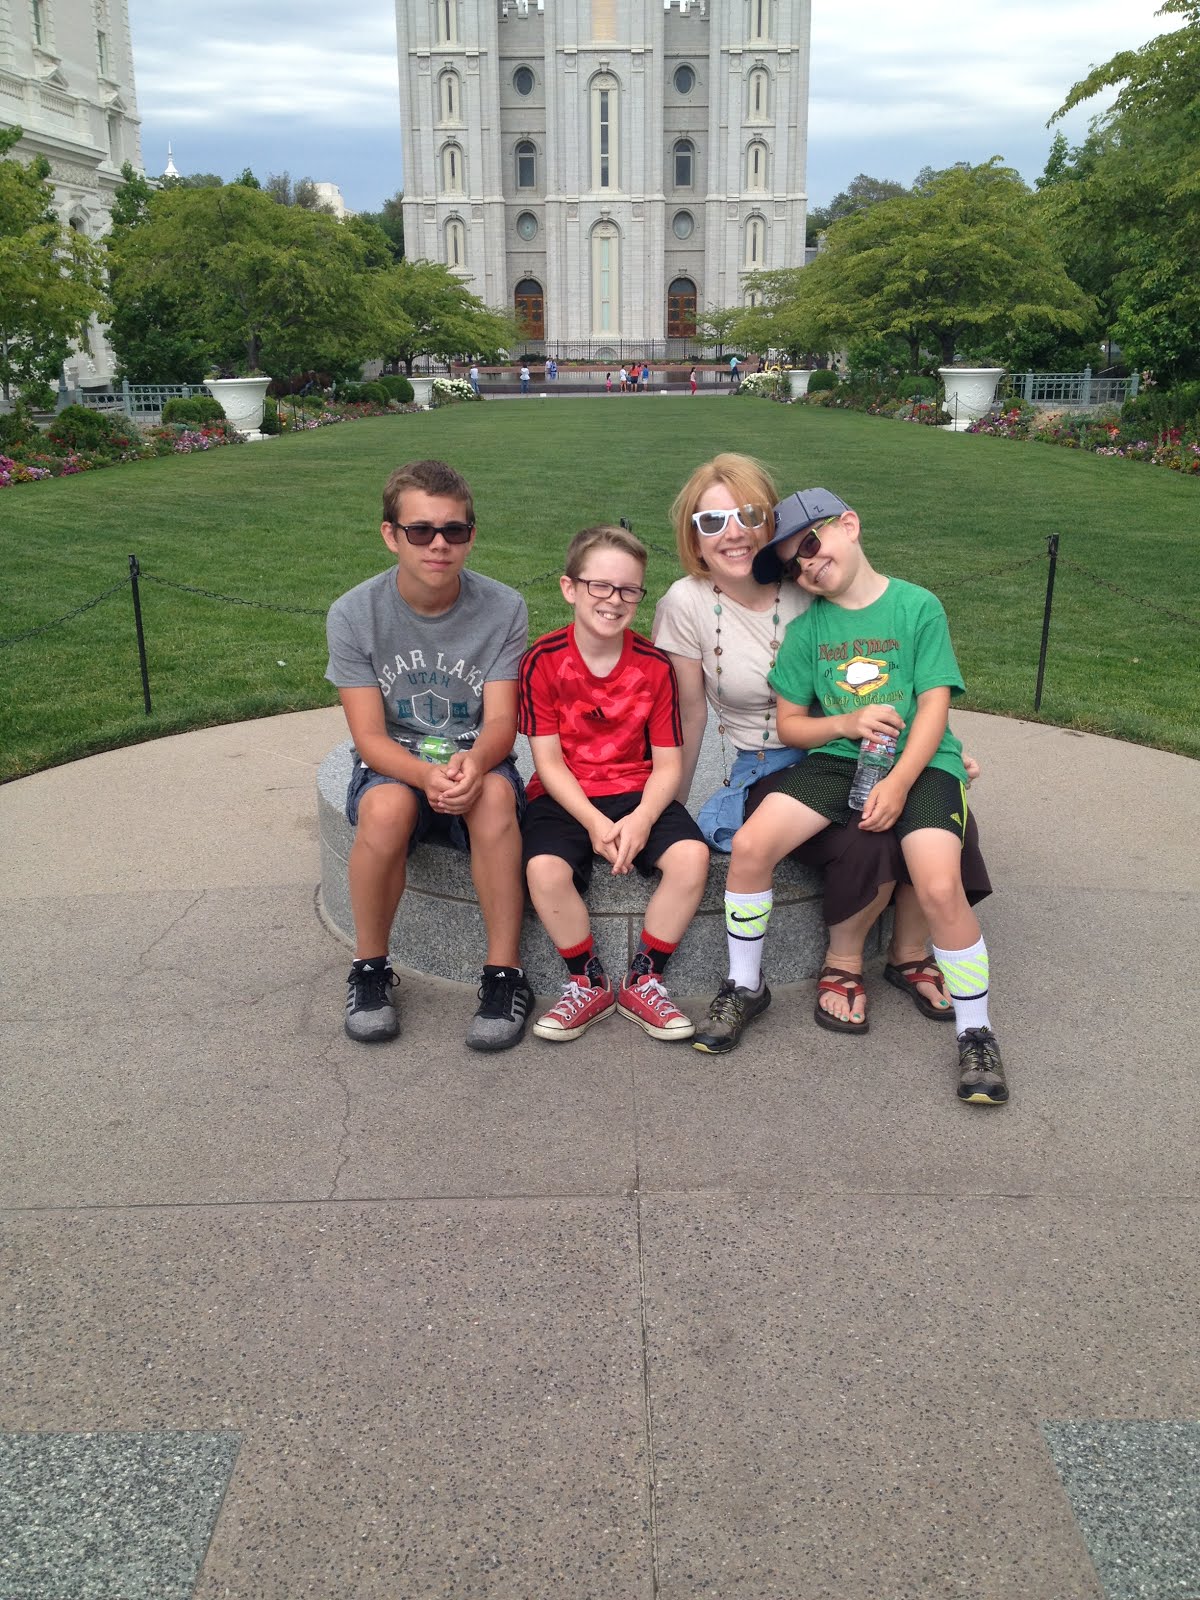 At Temple Square Summer 2016